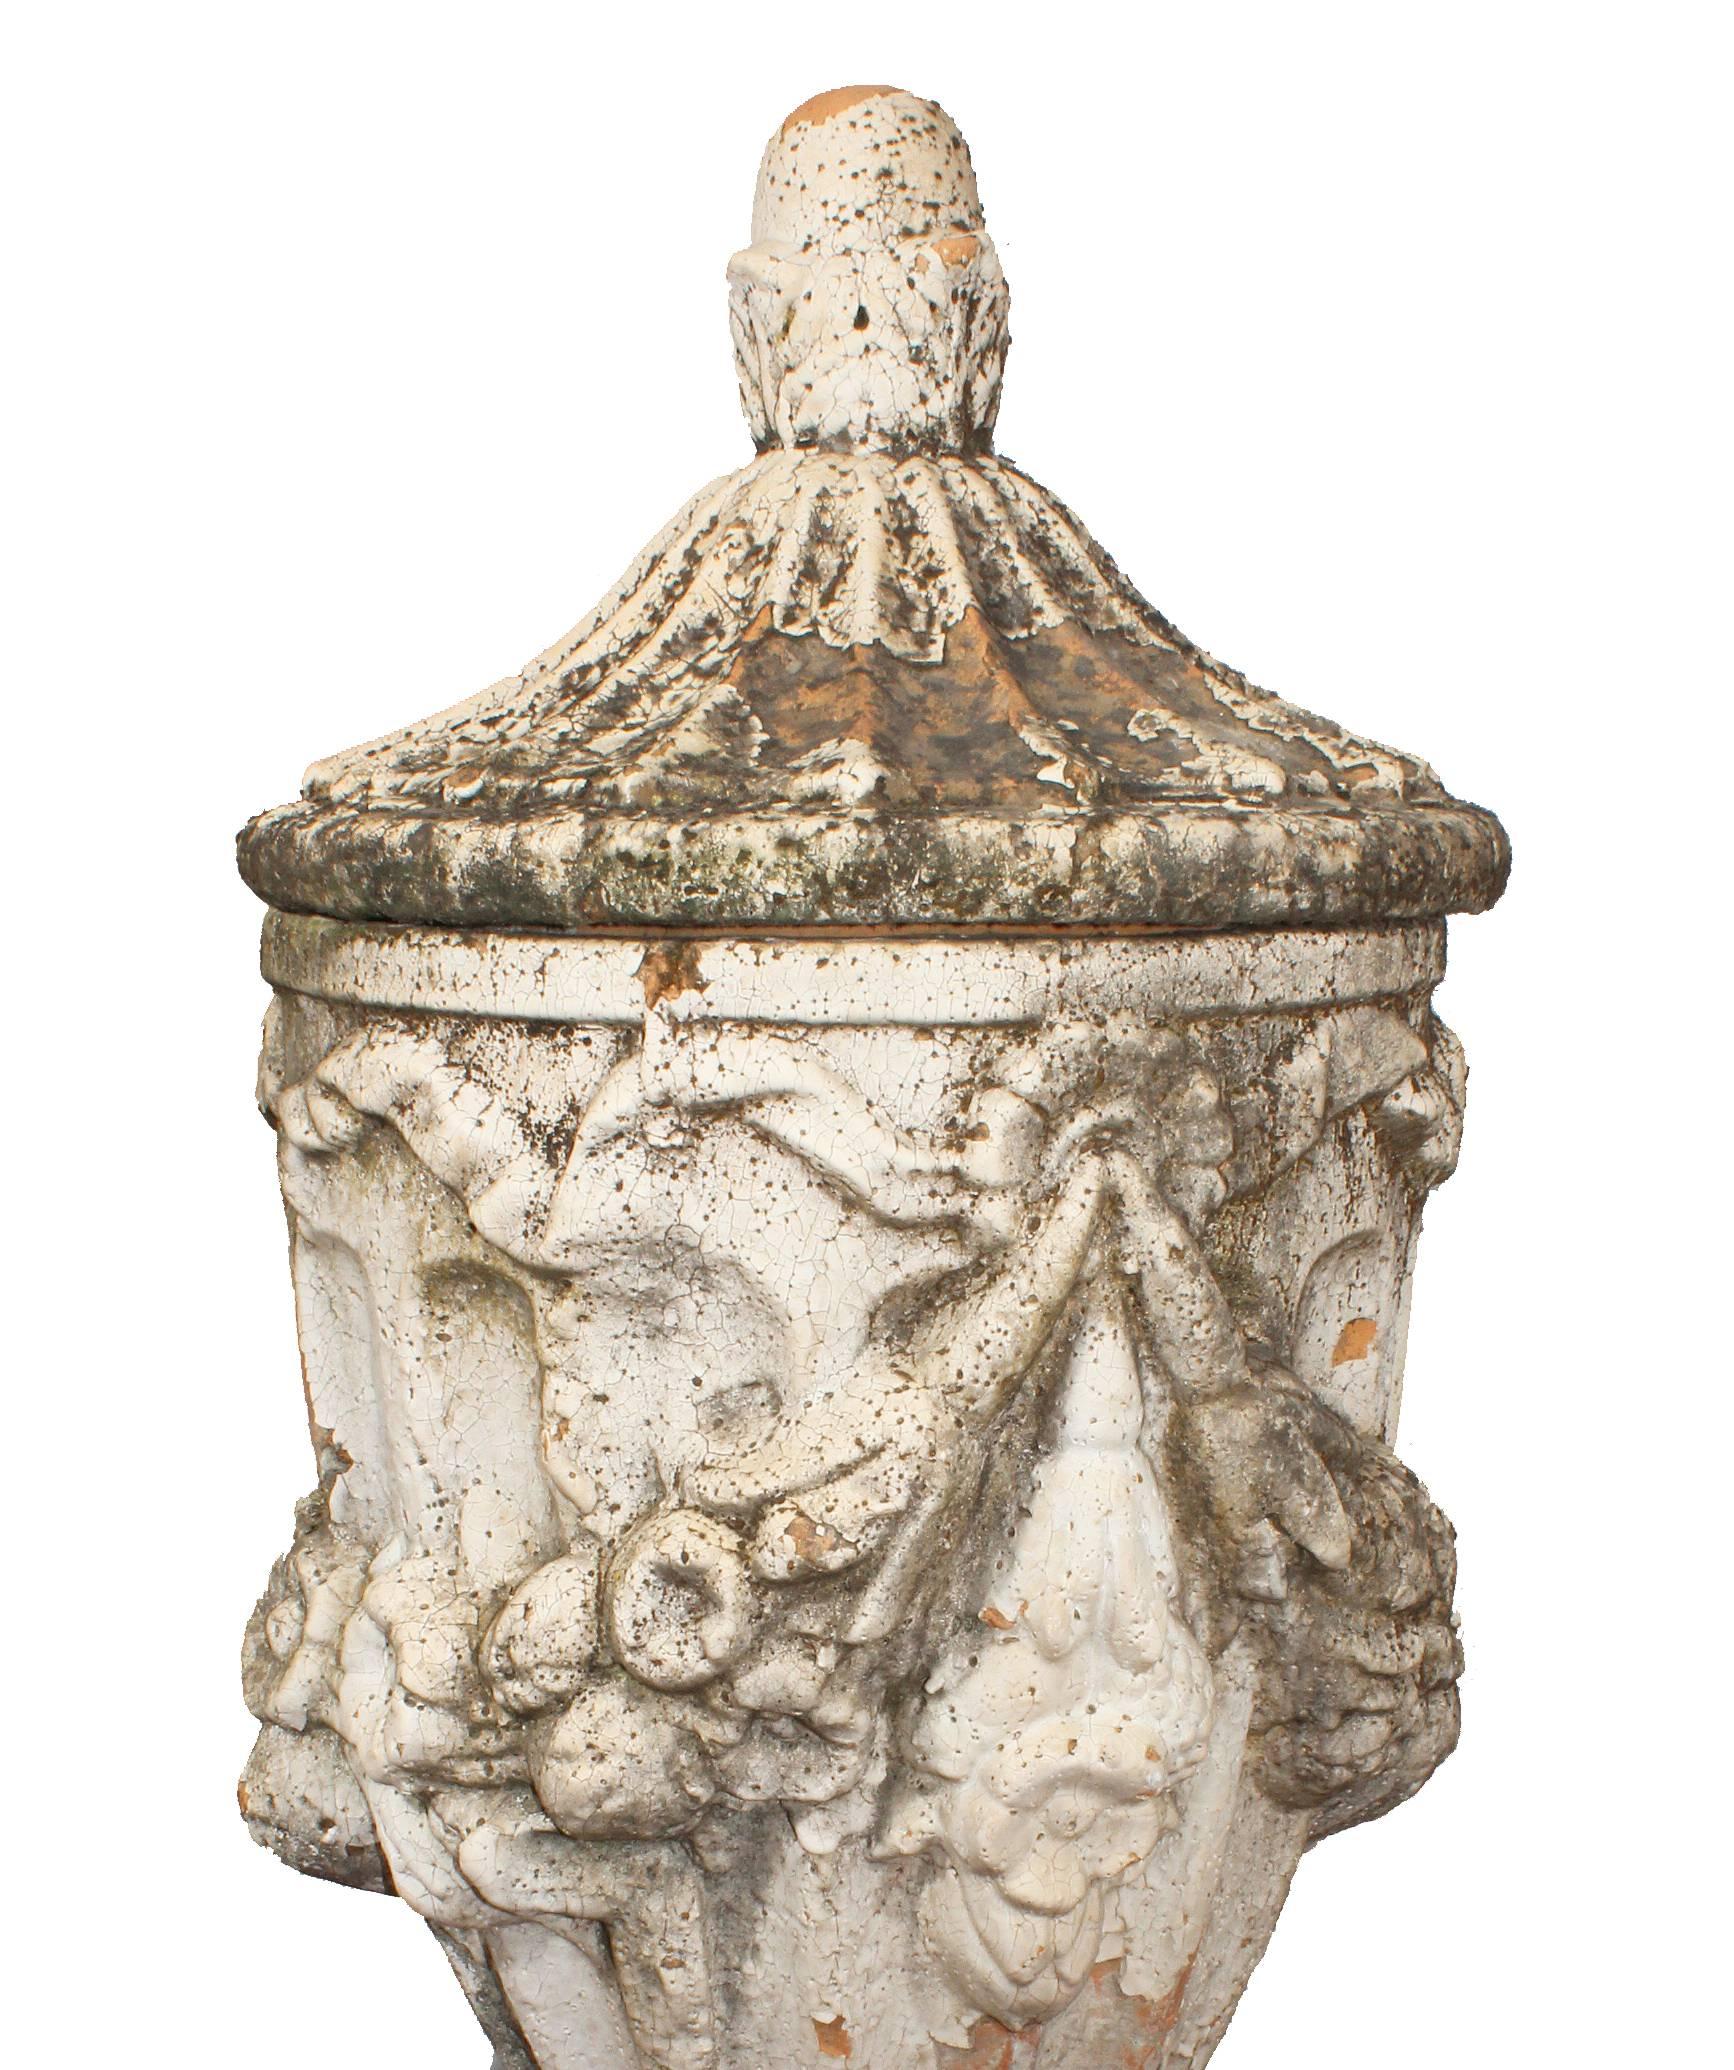 Classical style terracotta urns decorated with flower garlands.